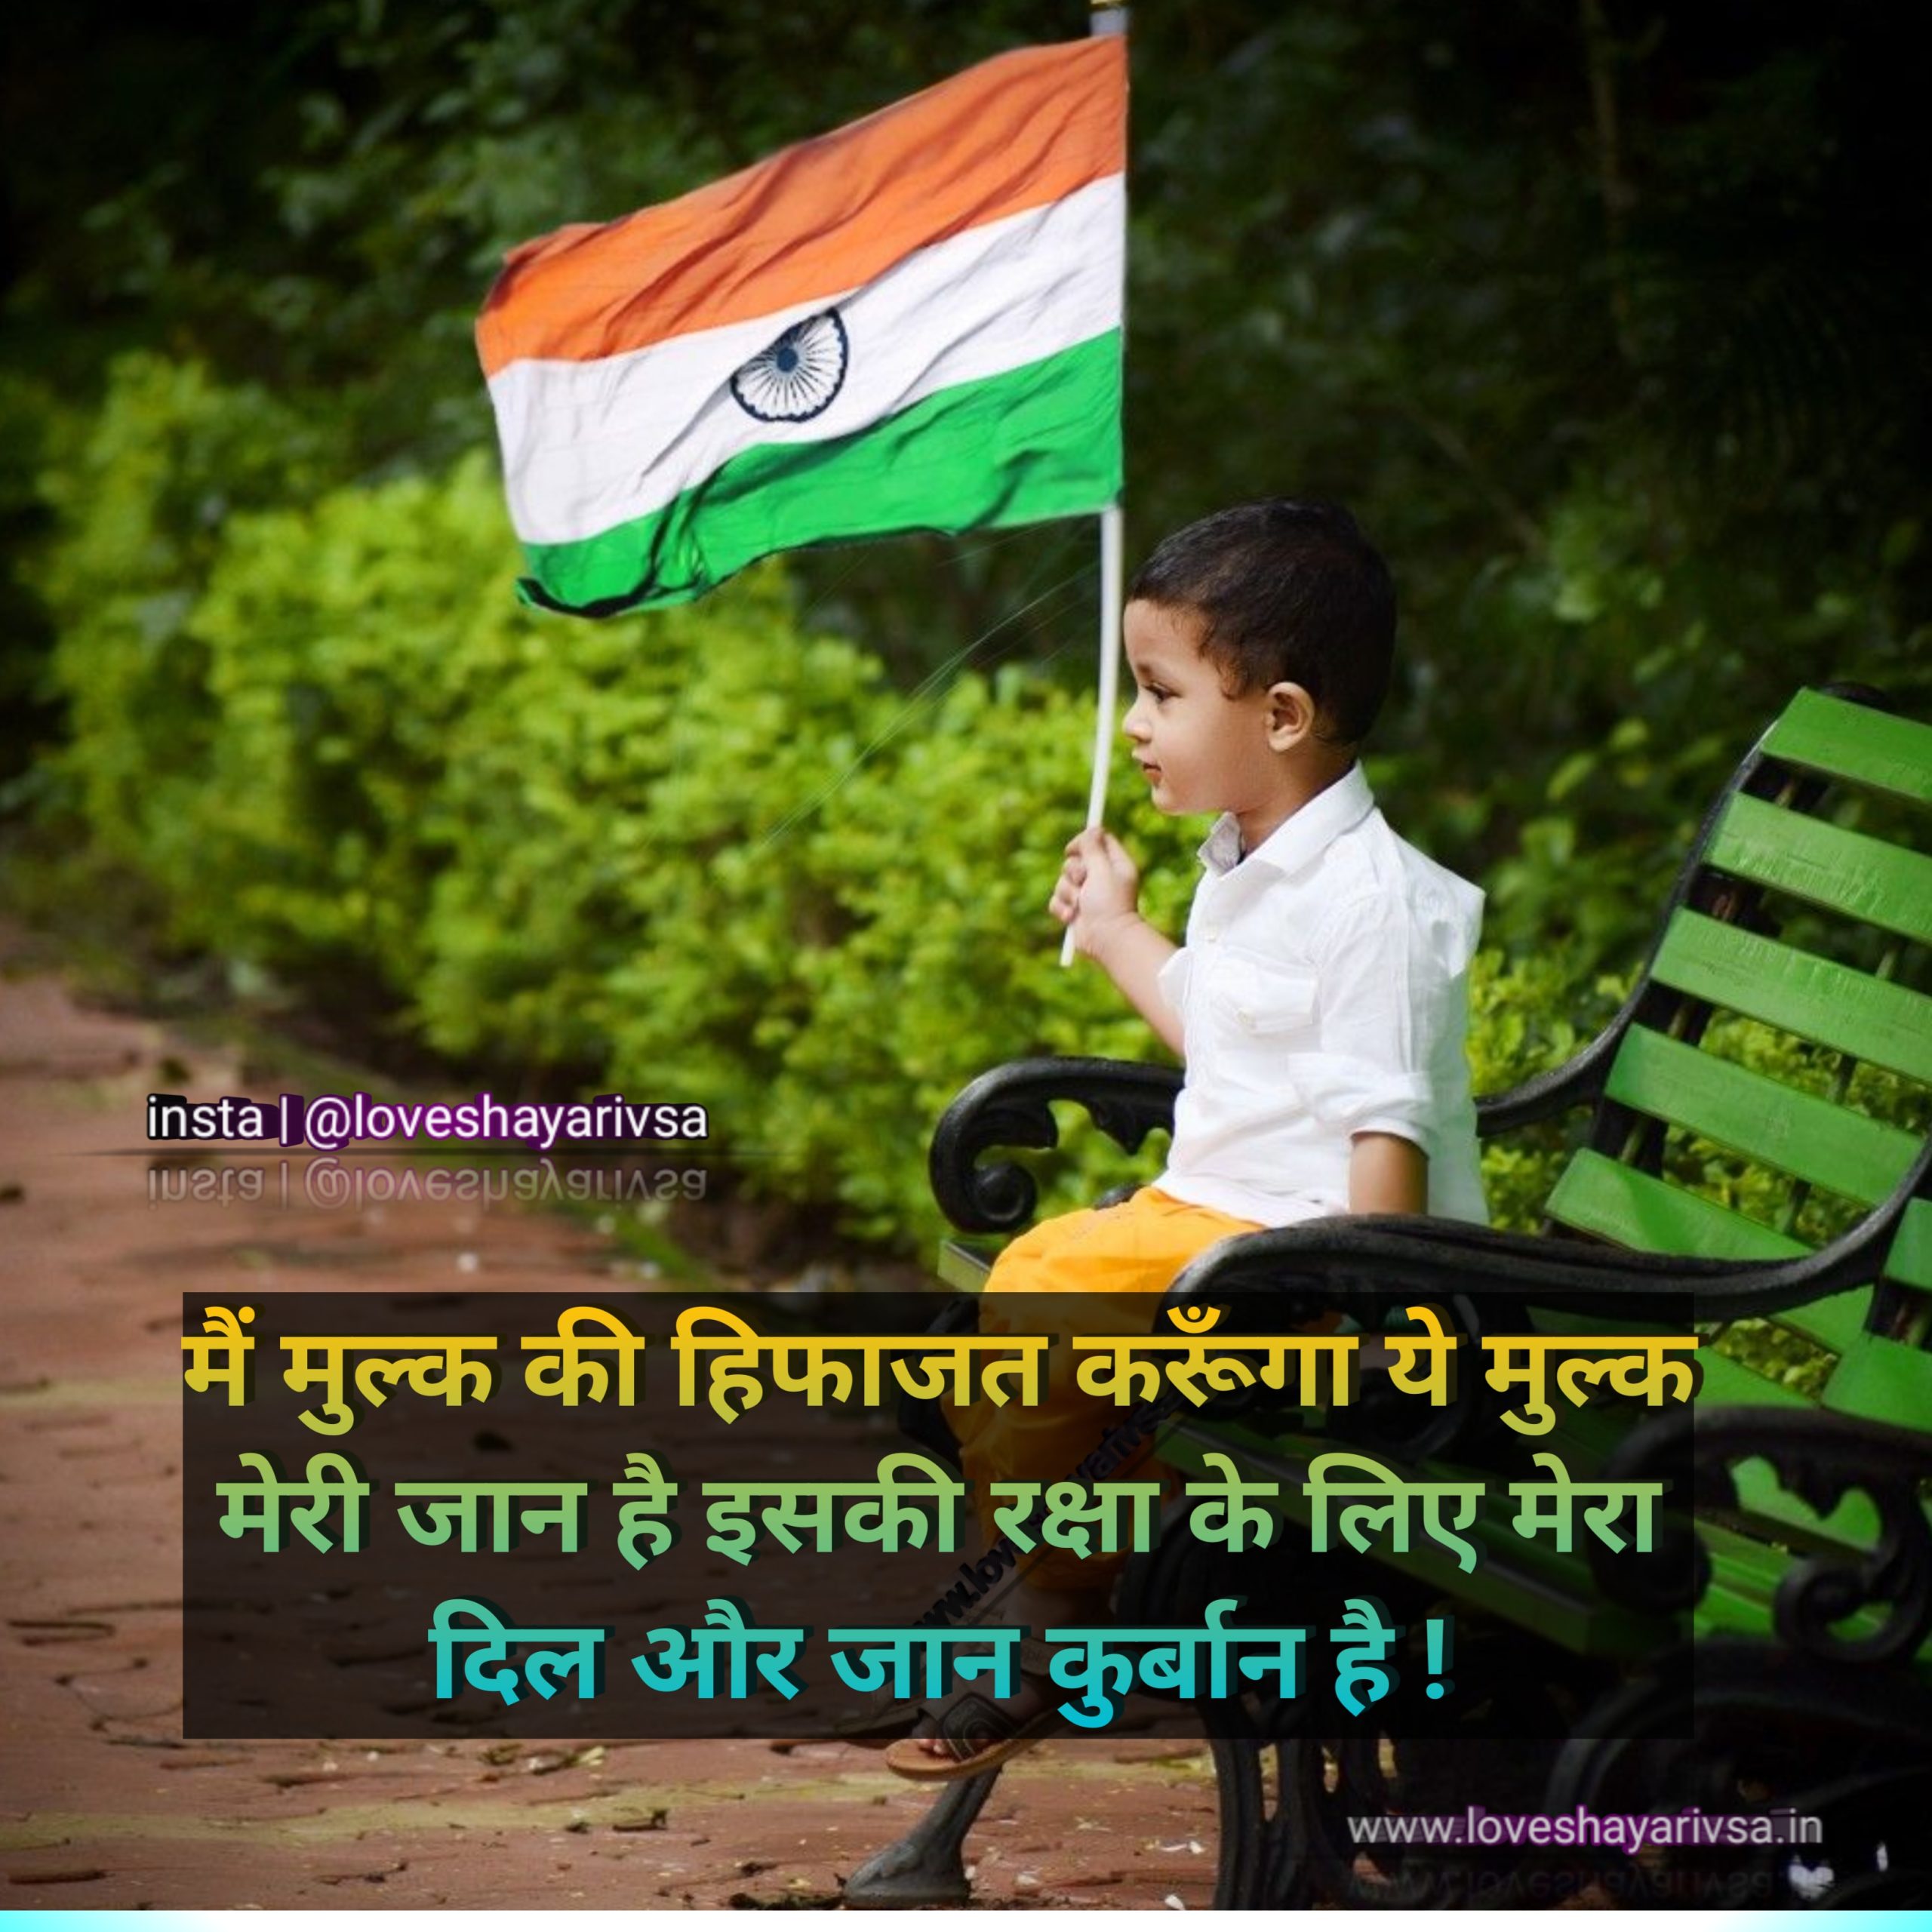 "A Young Boy Wrapped in the Tricolor, Standing Tall as a Symbol of India's Bright Future and Aspirations on Independence Day ЁЯЗоЁЯЗ│тЬи #PatrioticYouth #FutureLeaders"